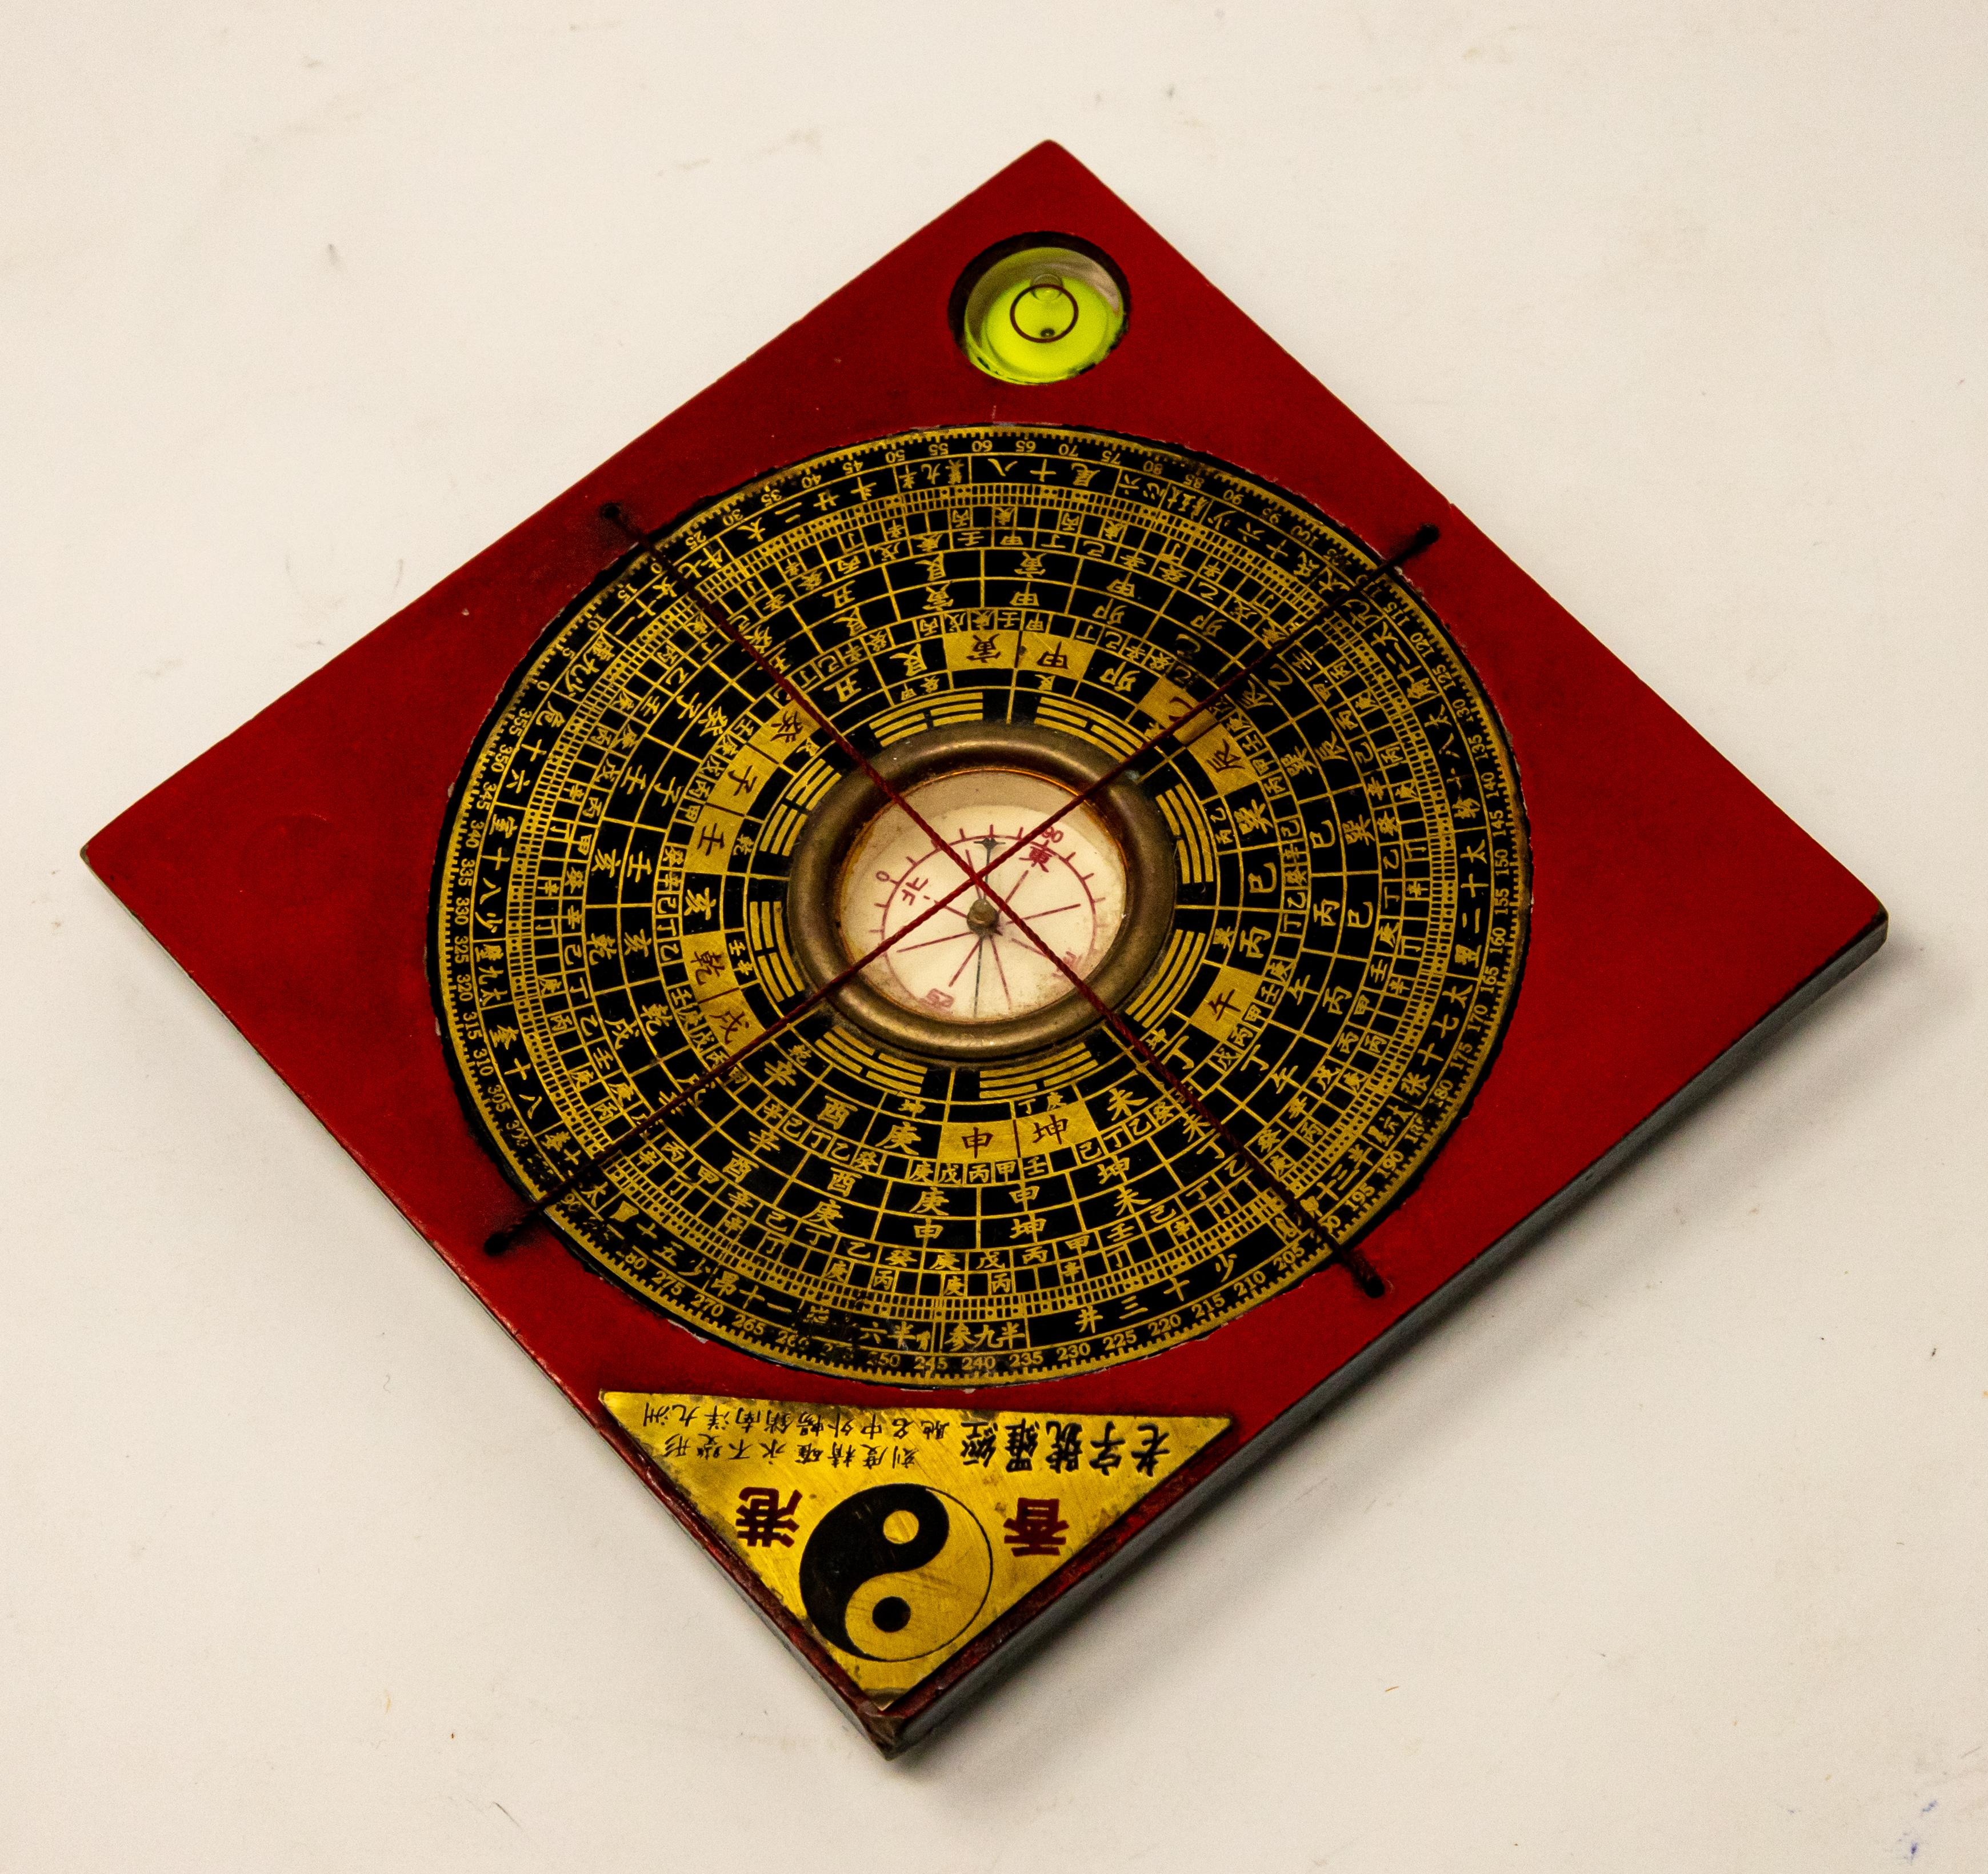 Offering this interesting feng shui compass and level. It has many symbols and you can turn the dial to your settings. Feng shui, also known as Chinese geomancy, is a pseudoscience originating from ancient China, which claims to use energy forces to